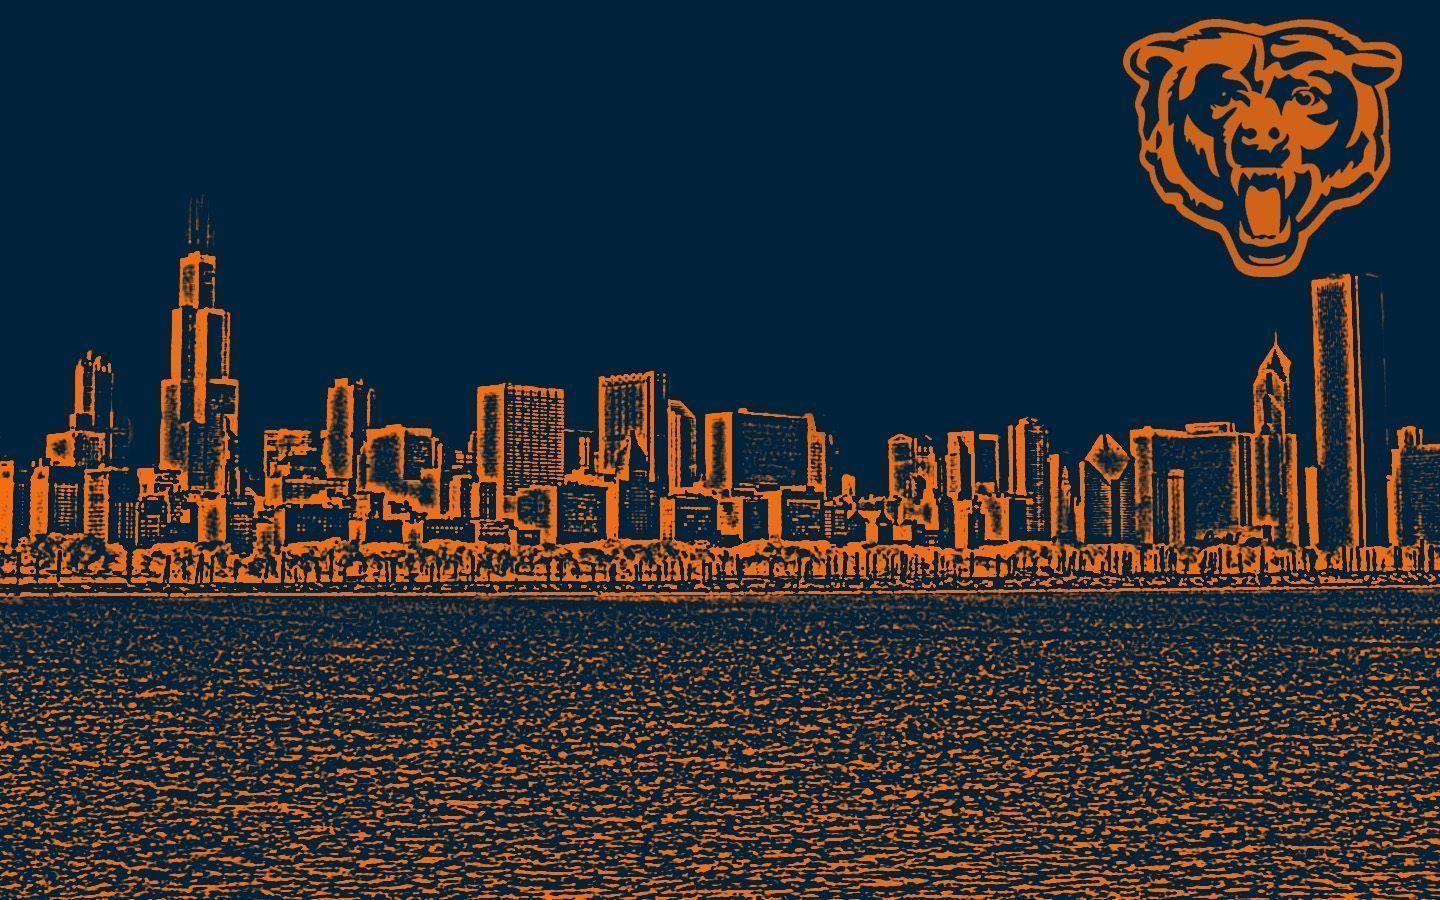 Chicago Bears Wallpapers 2016 - Wallpaper Cave